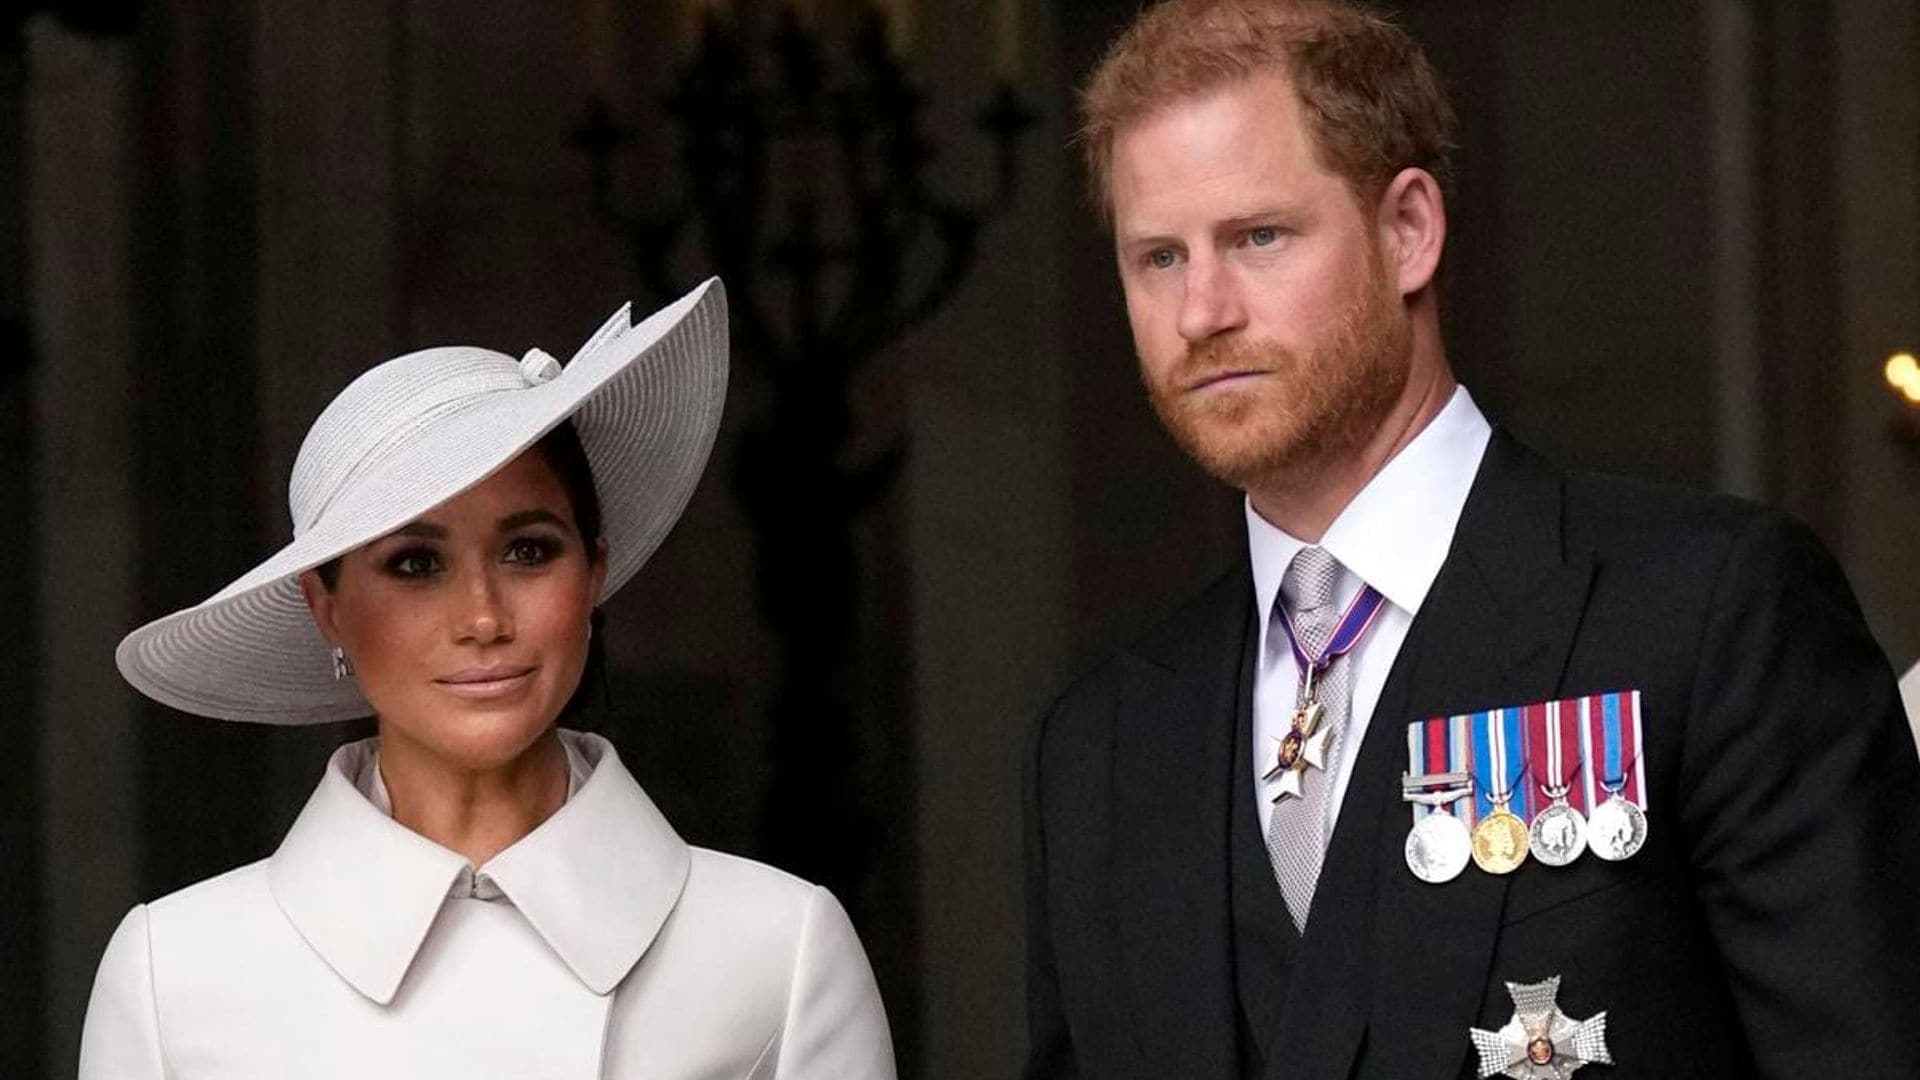 Prince Harry says he and Meghan ‘felt forced’ to step back from roles